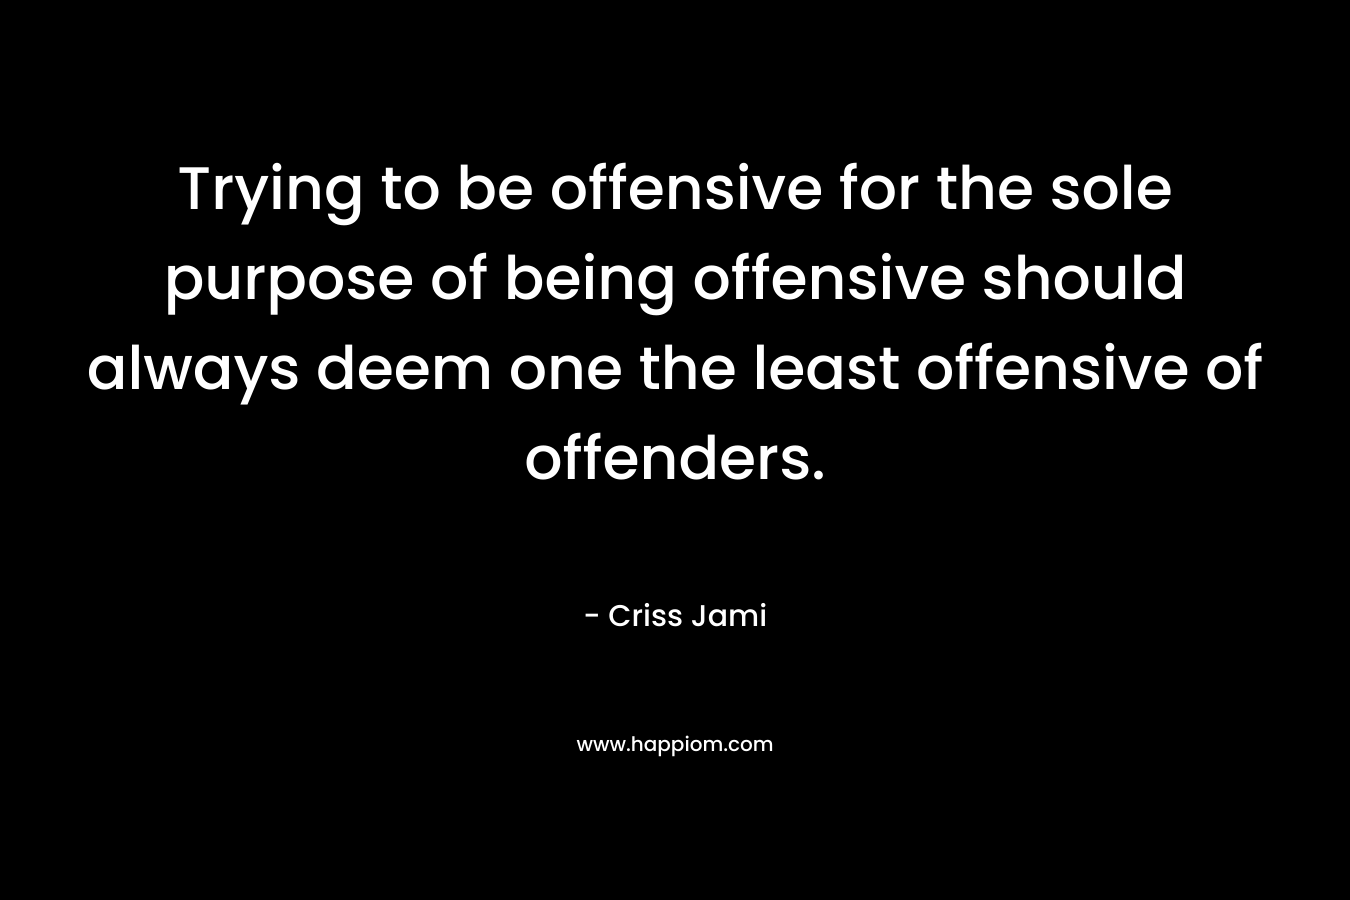 Trying to be offensive for the sole purpose of being offensive should always deem one the least offensive of offenders. – Criss Jami